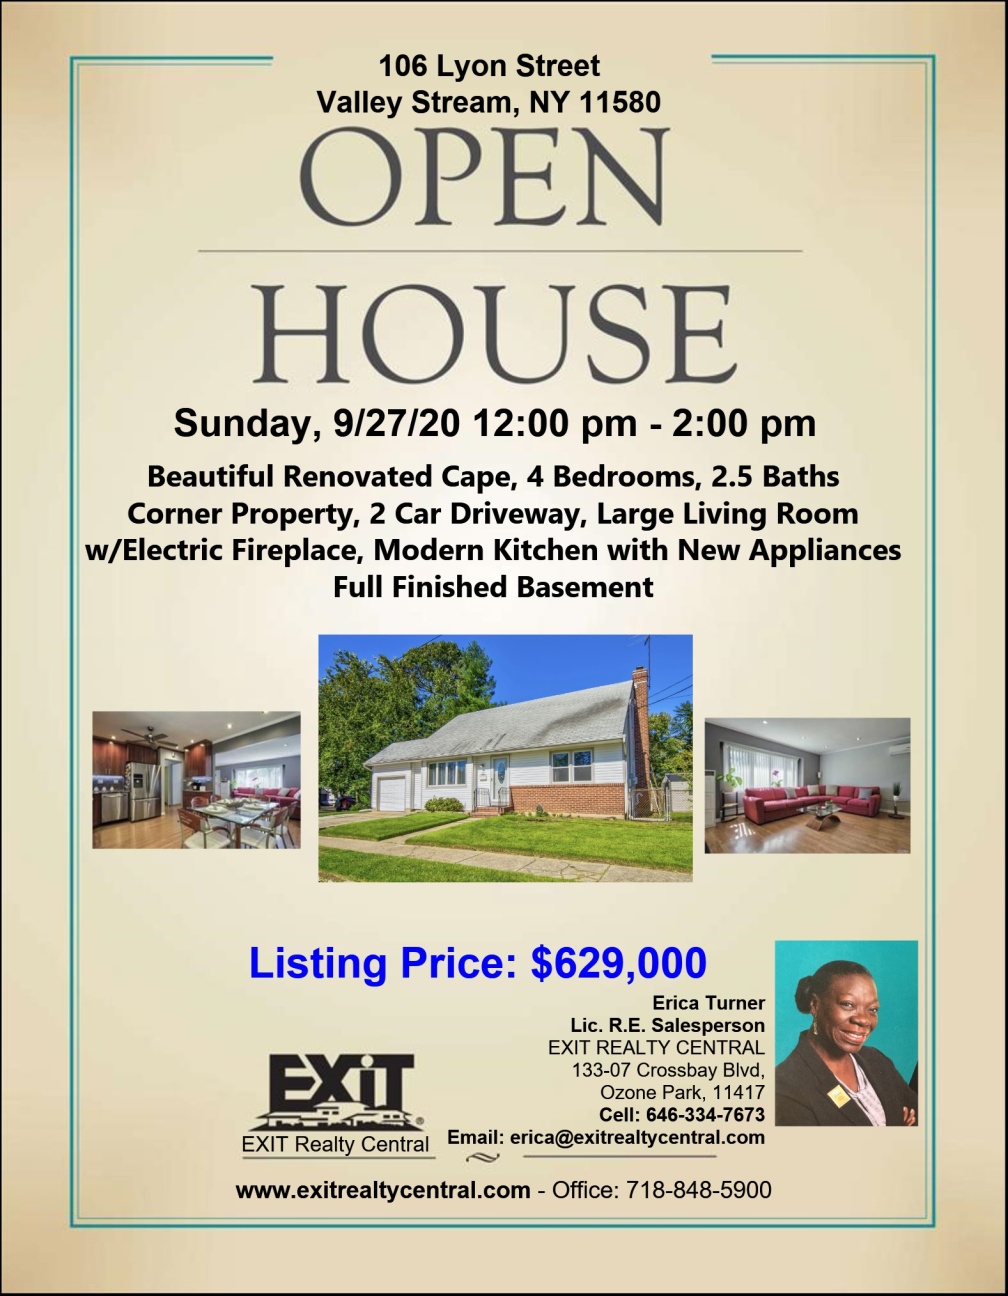 Open House in Valley Stream Sunday 9/27 12-2pm-MLS #3254165